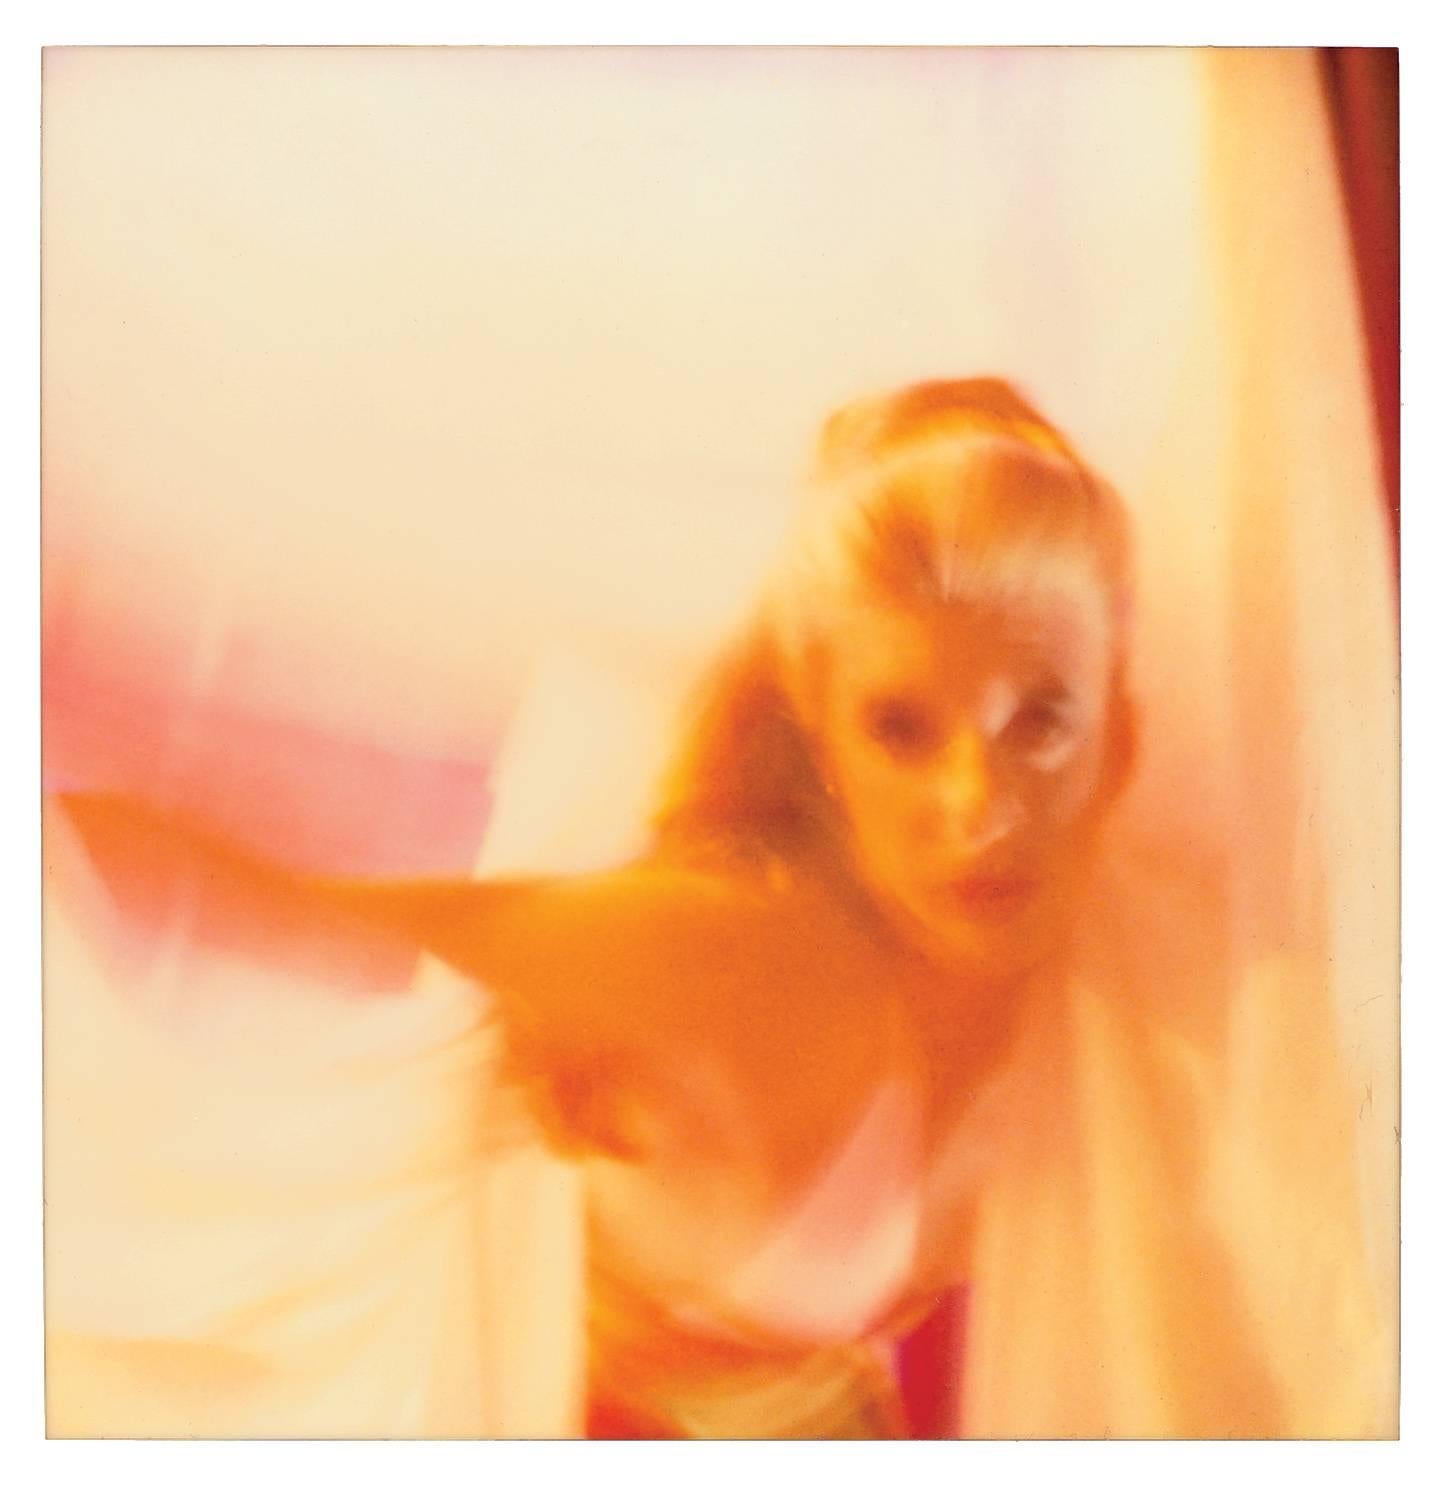 The Dancer (Stay), 2006, 37x36cm,
Edition of 2/5, Lambda Print, 

based on a Stefanie Schneider expired Polaroid photograph from the feature film "Stay" 2006
Certificate and Signature label
artist Inventory Nr. 5315.10
not mounted


Torsten Scheid,